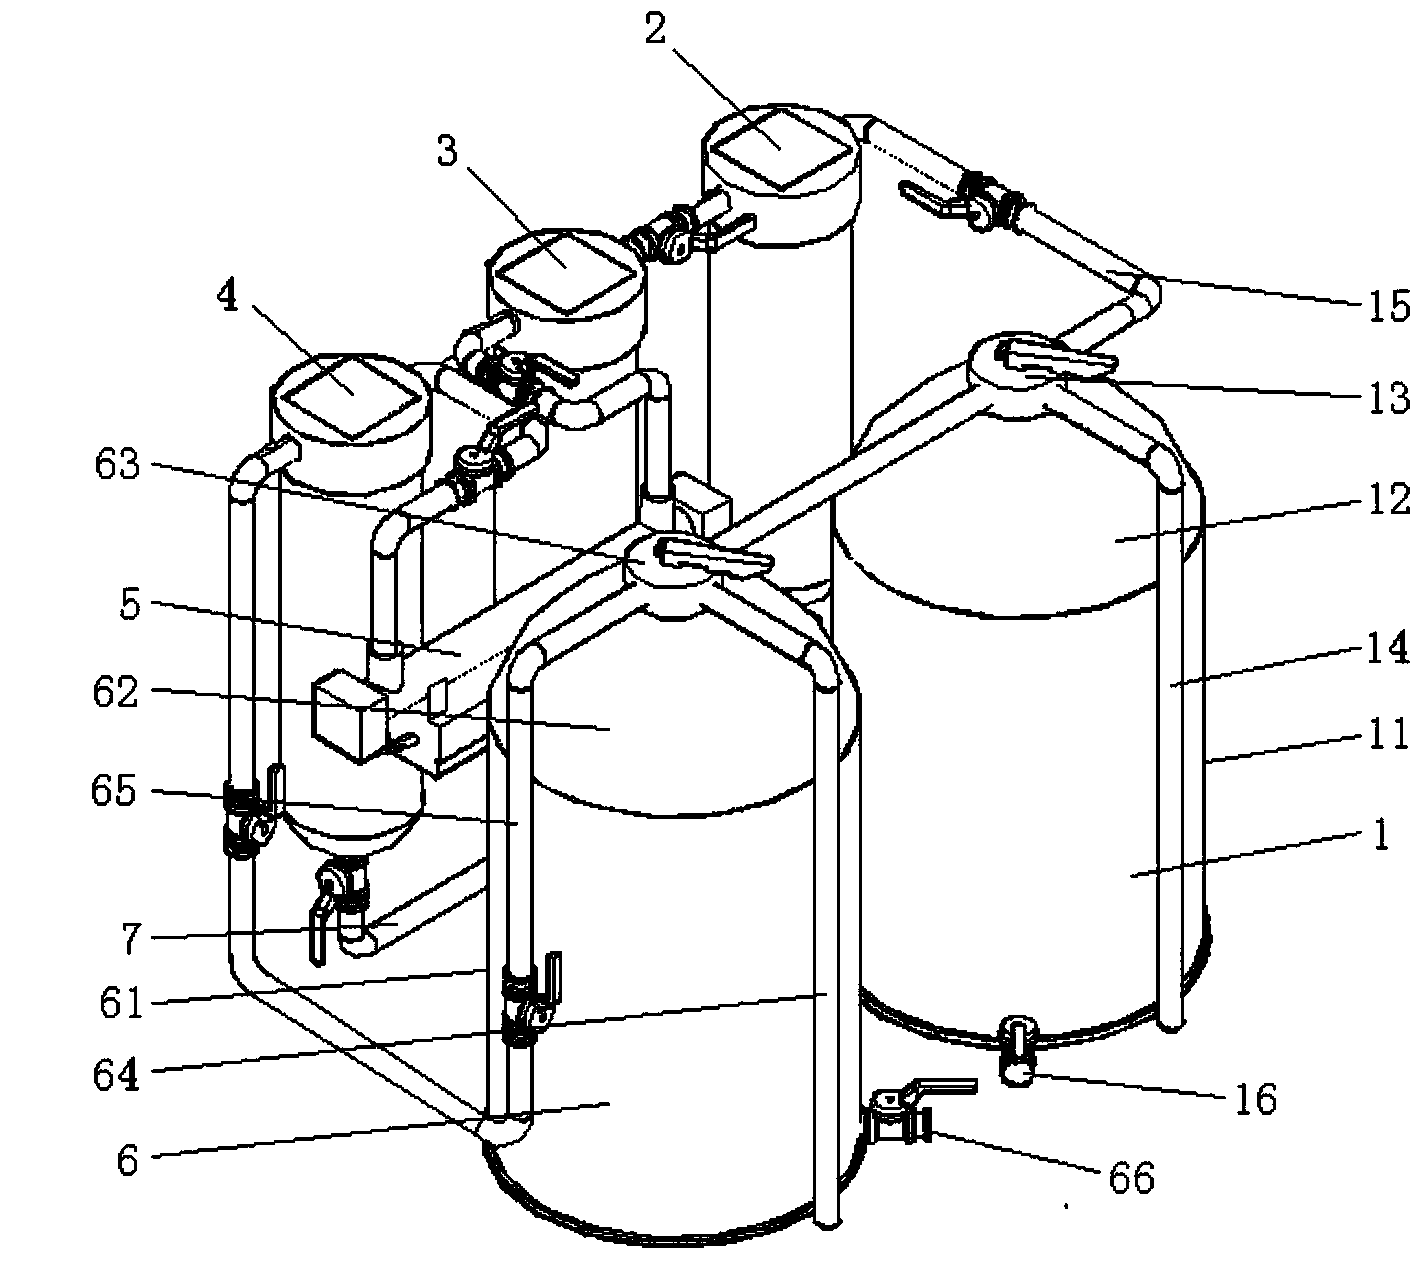 Comprehensive water treatment system